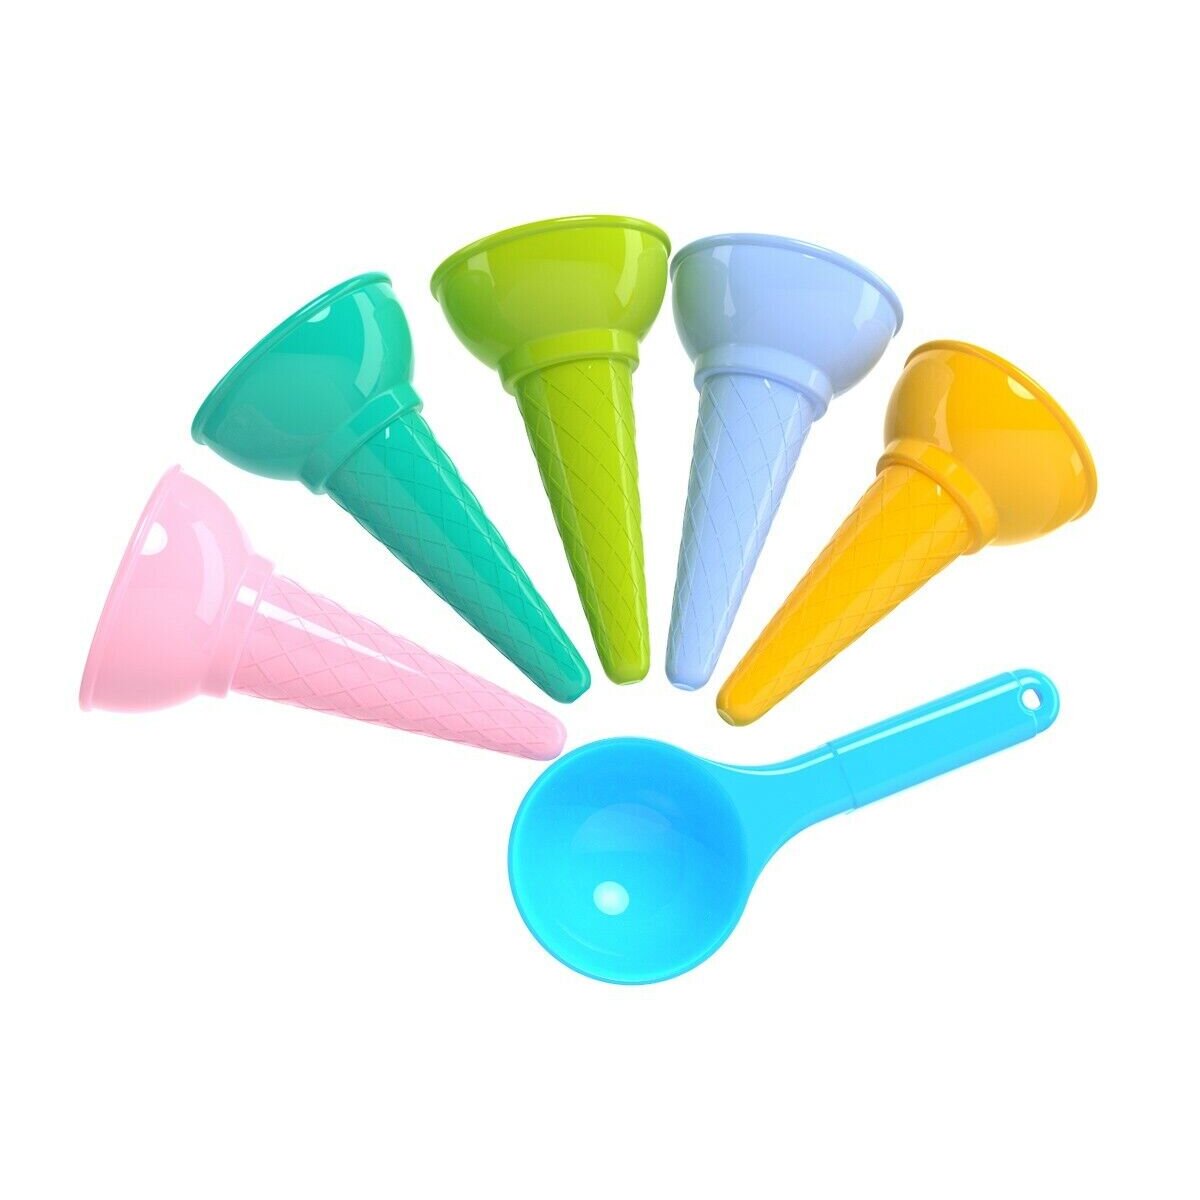 Ice Cream Cones Colorful Molds Cafe Kid Toy Set for Playing Sand